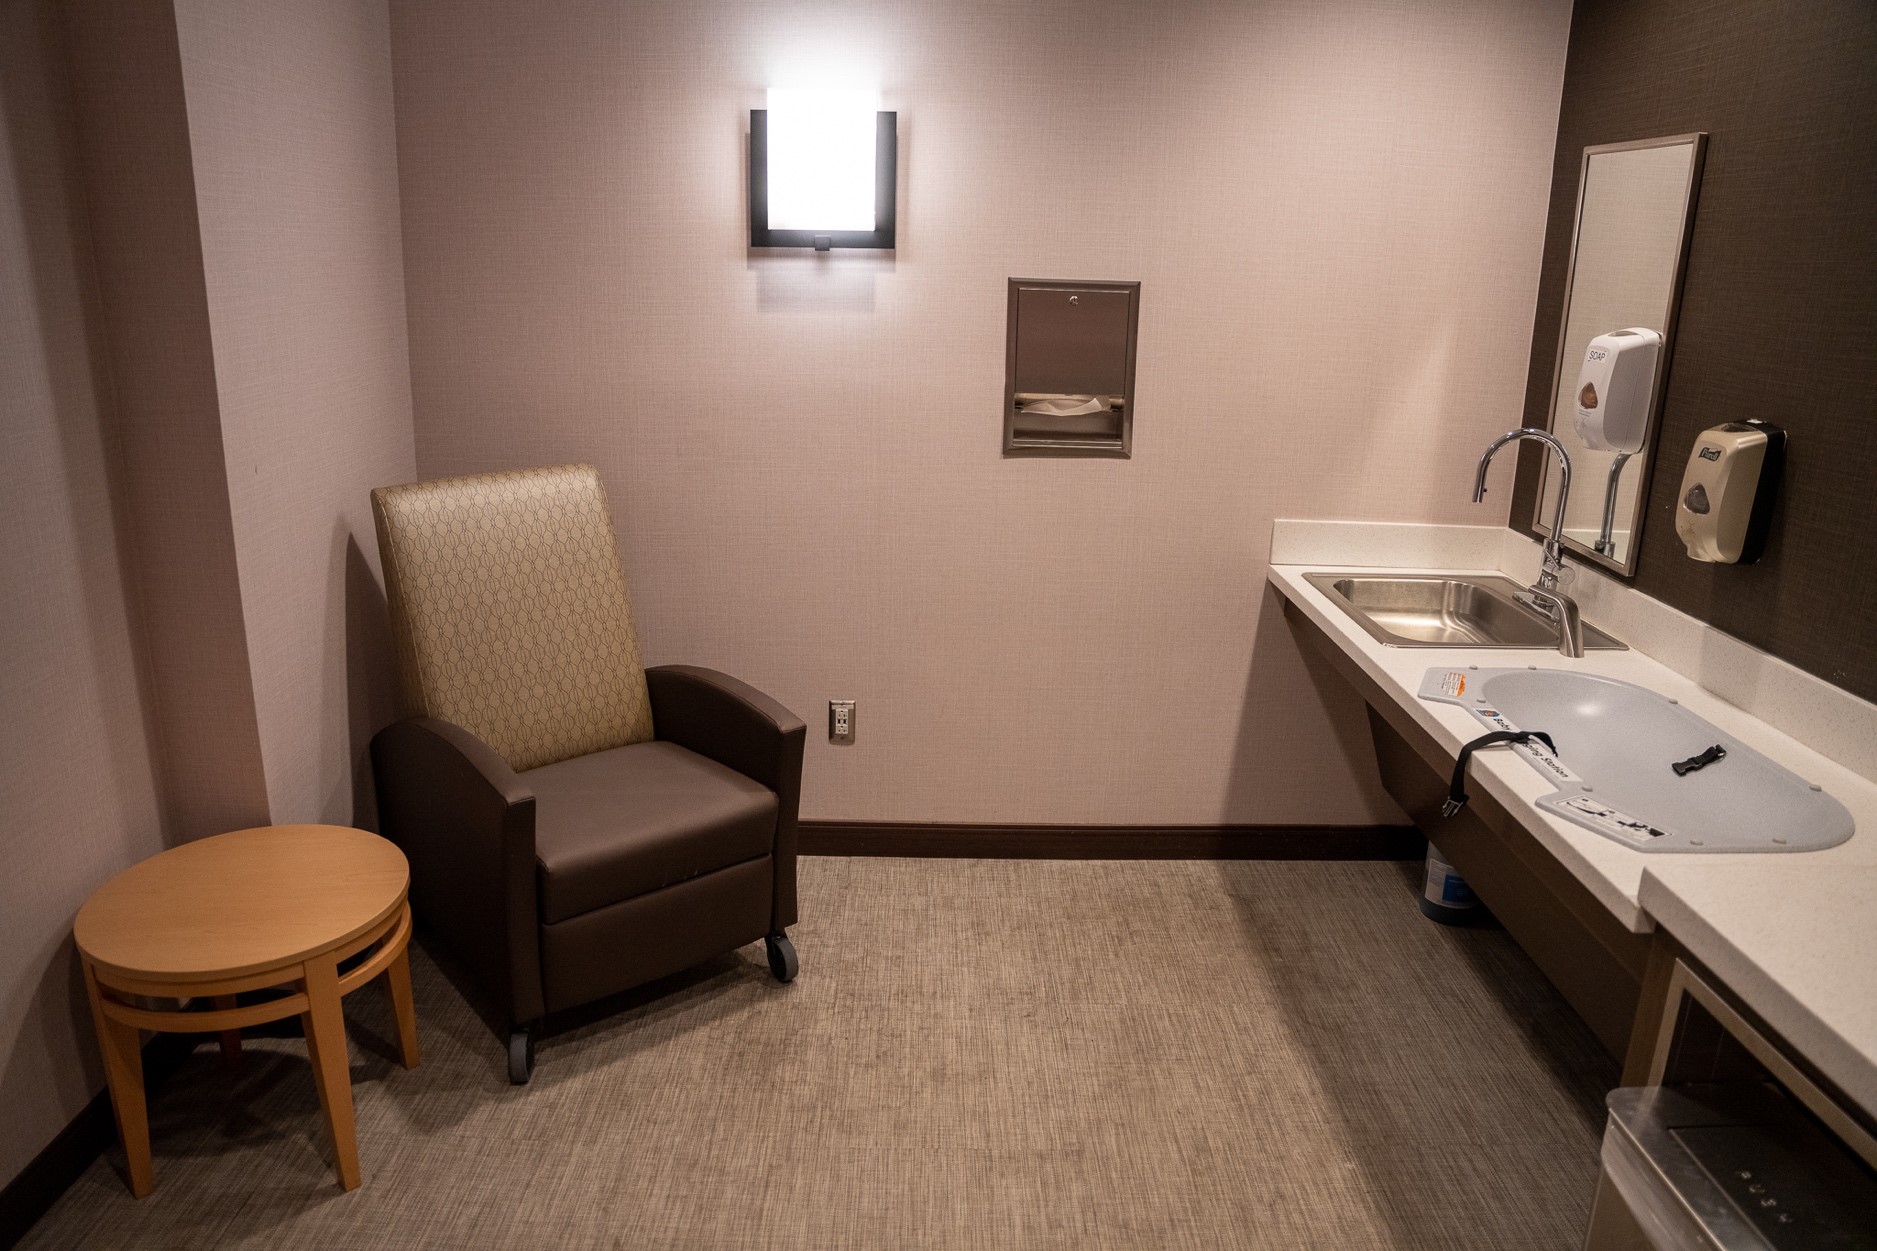 Photo shows one of the mothers rooms available to parents traveling with young children. A baby changing station, sink, trashcan and comfortable seating are available for free. 